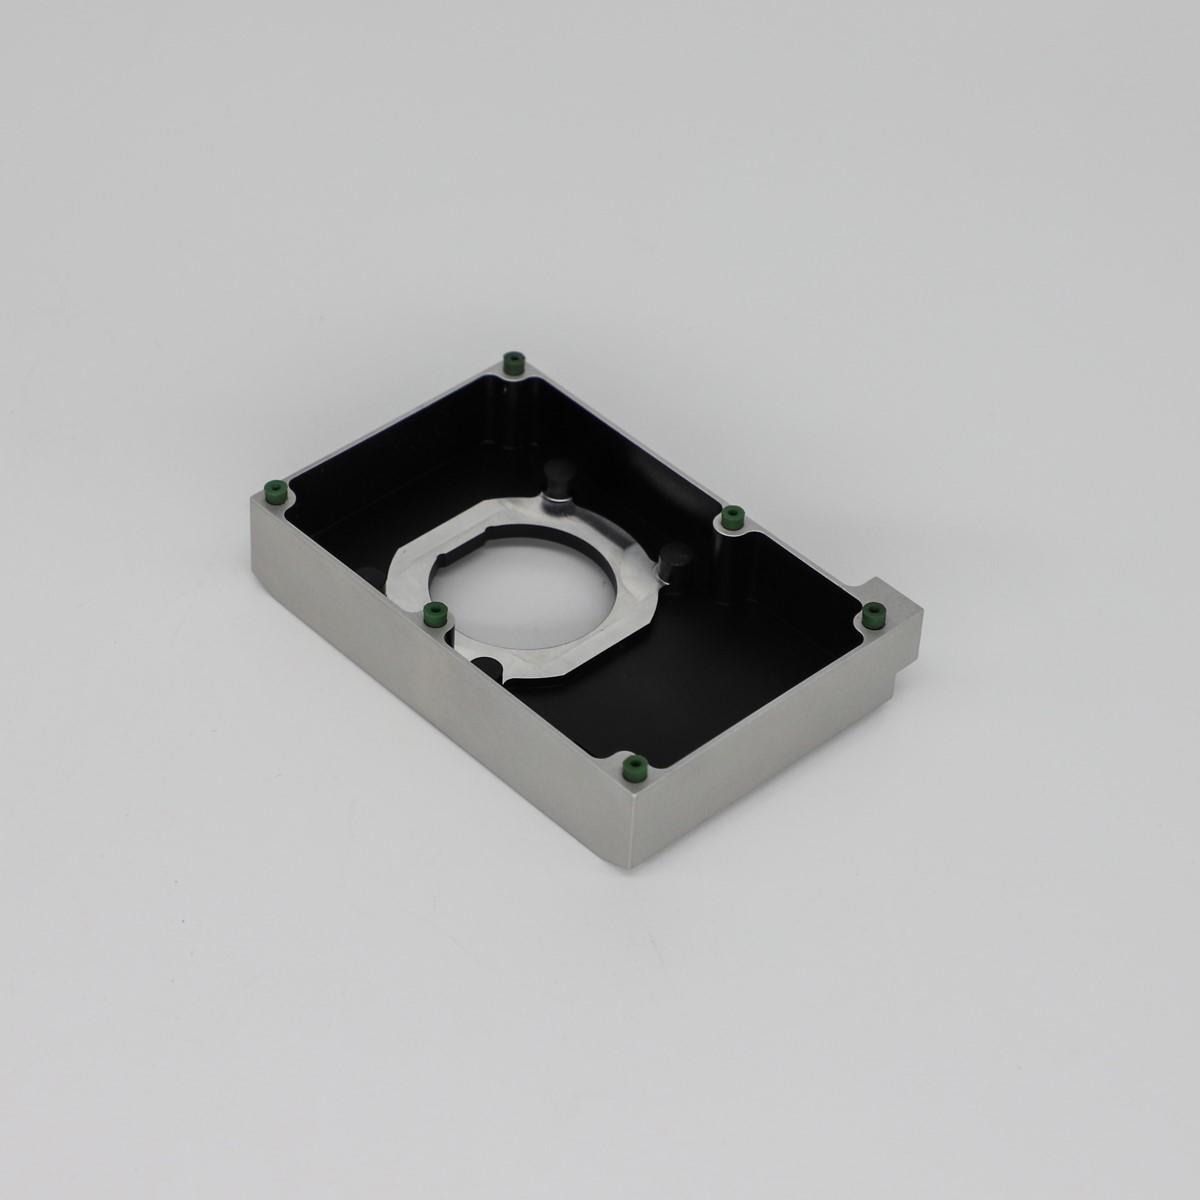 Xavier optical die casting components highly-rated free delivery